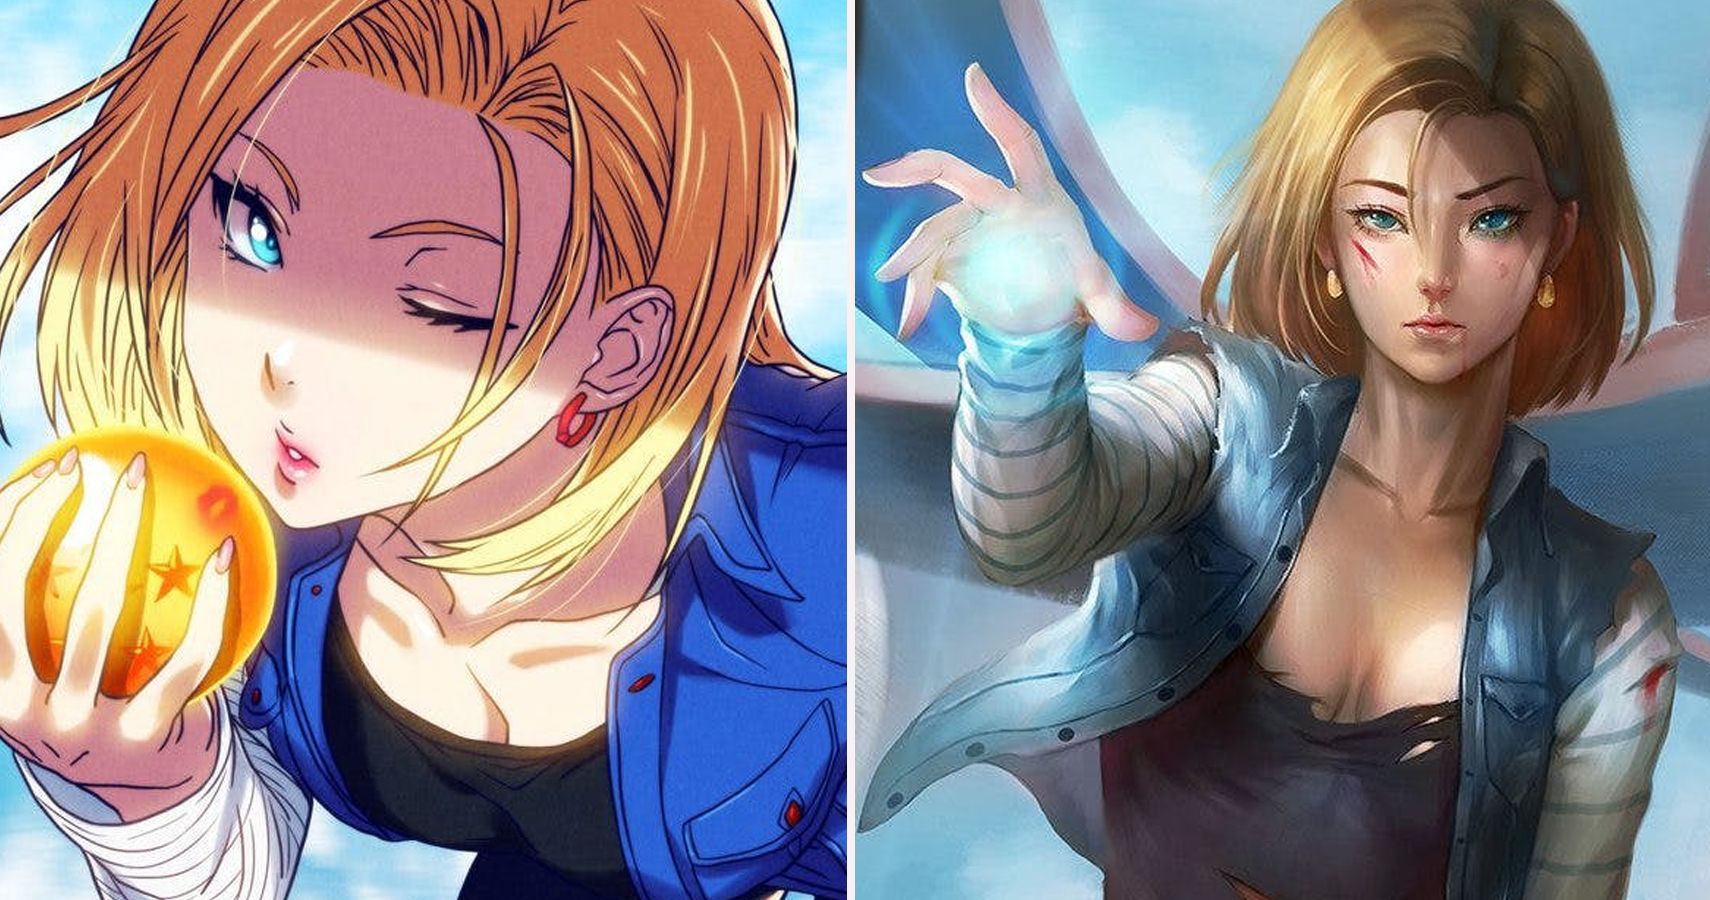 Gear Turning: 25 Steamy Android 18 Fan Art Image That Go Too Far